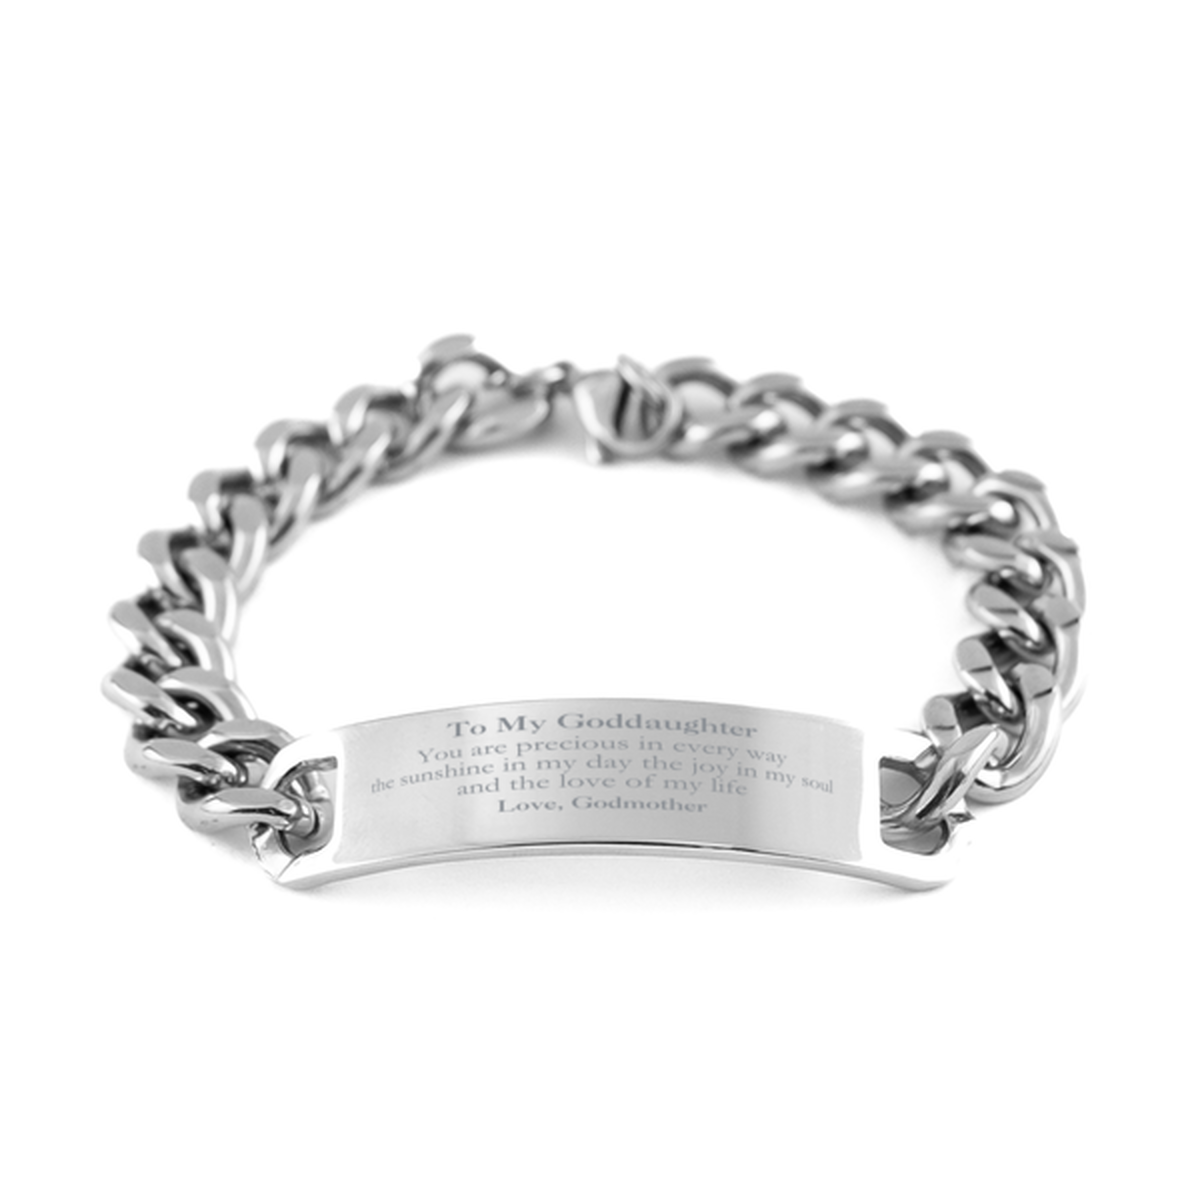 Graduation Gifts for Goddaughter Cuban Chain Stainless Steel Bracelet Present from Godmother, Christmas Goddaughter Birthday Gifts Goddaughter You are precious in every way the sunshine in my day. Love, Godmother